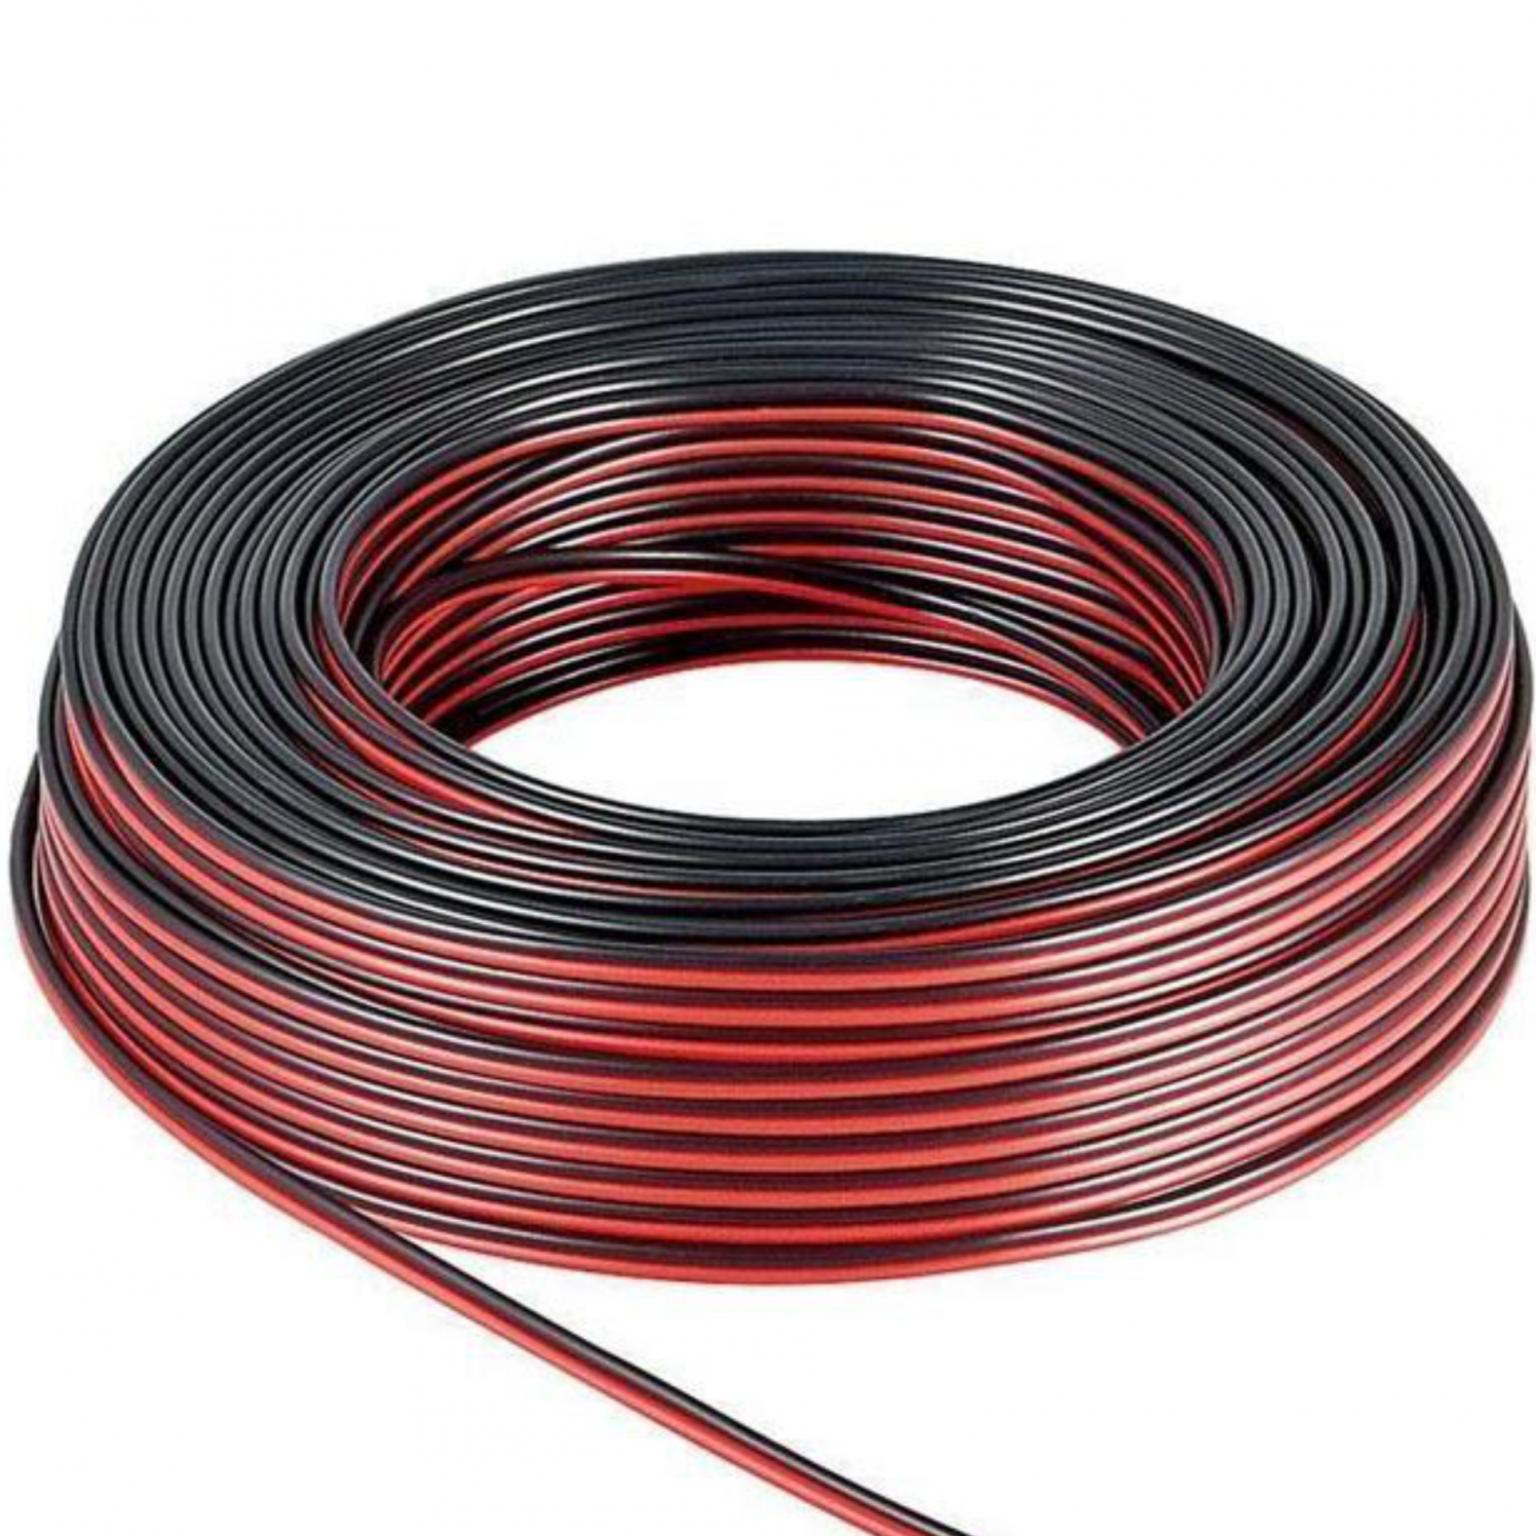 Image of Speaker cable red/black 25 m rolll, cable diameter 2 x 0,5 mm? - Gooba